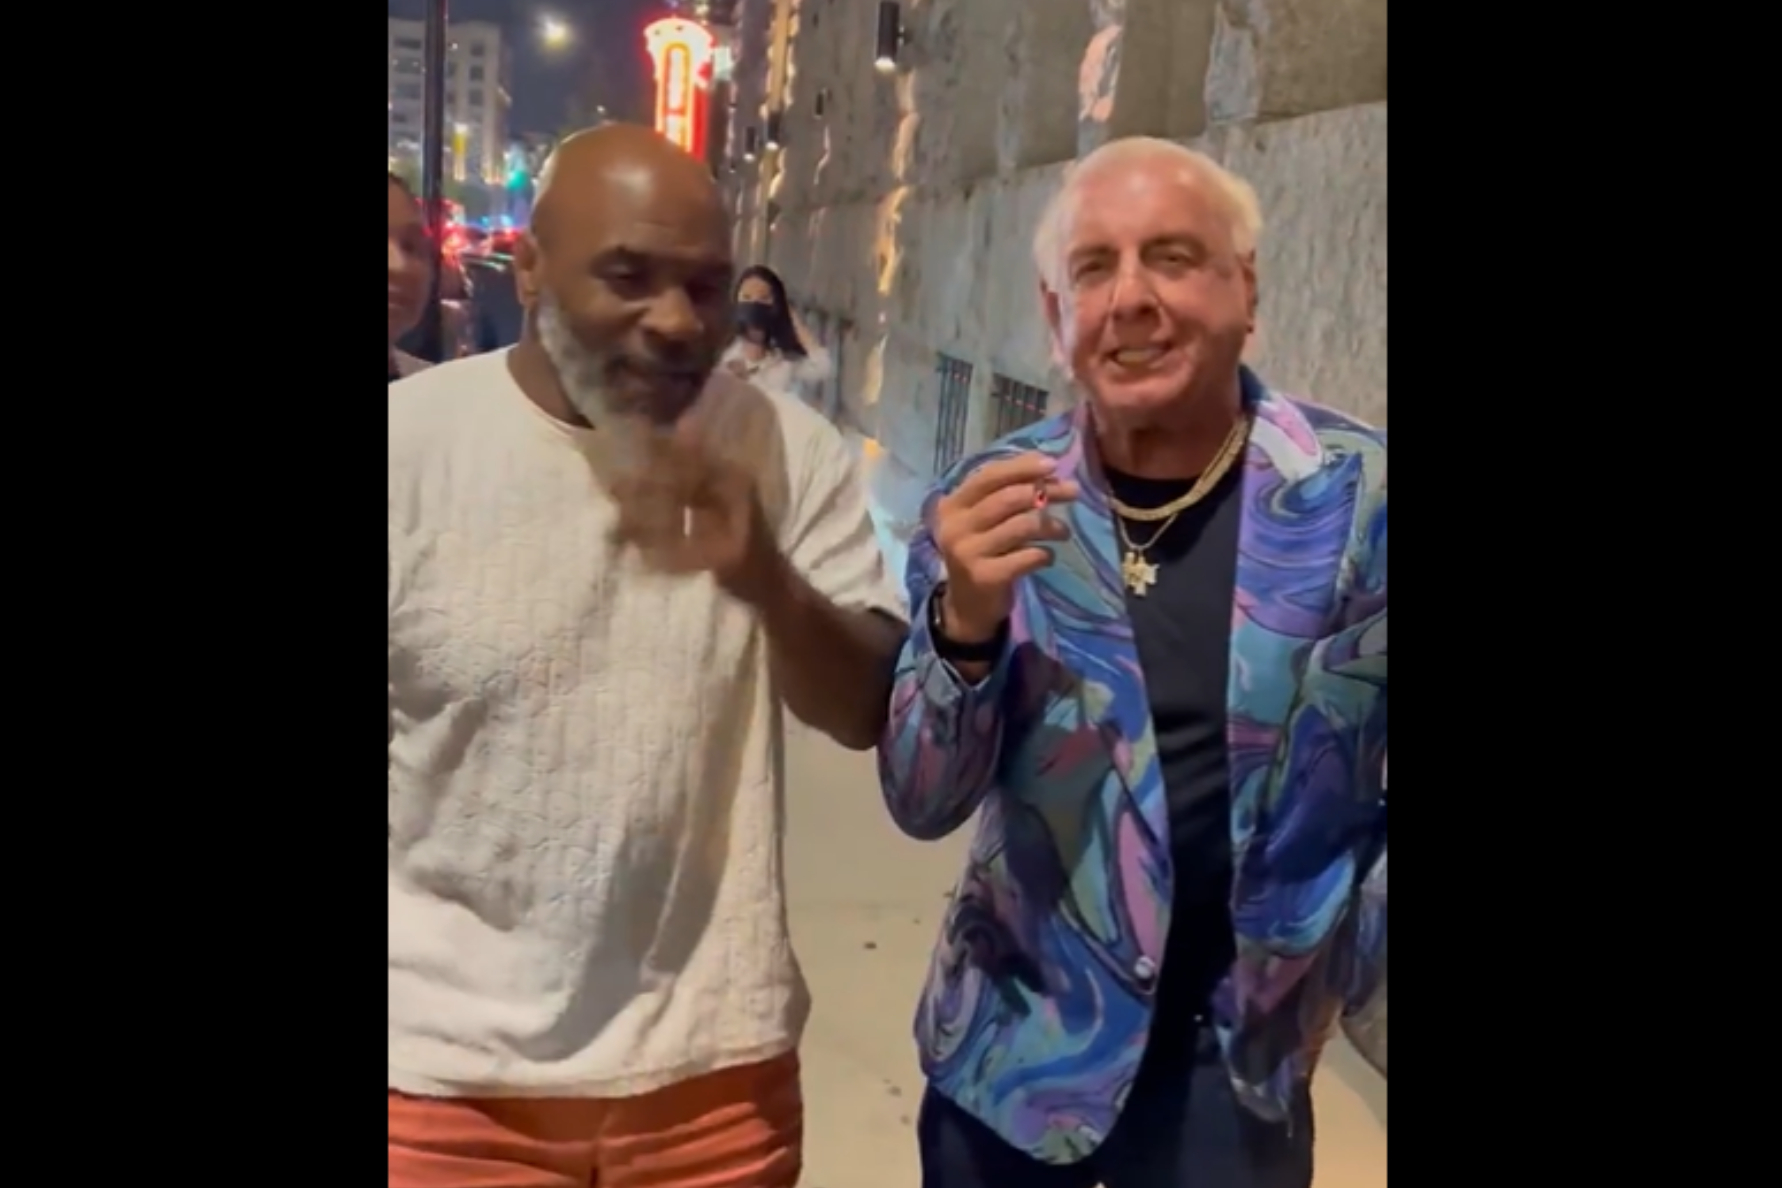 Mike Tyson and Ric Flair smoking weed on the sidewalk in Chicago. - Twitter: @RicFlairNatrBoy